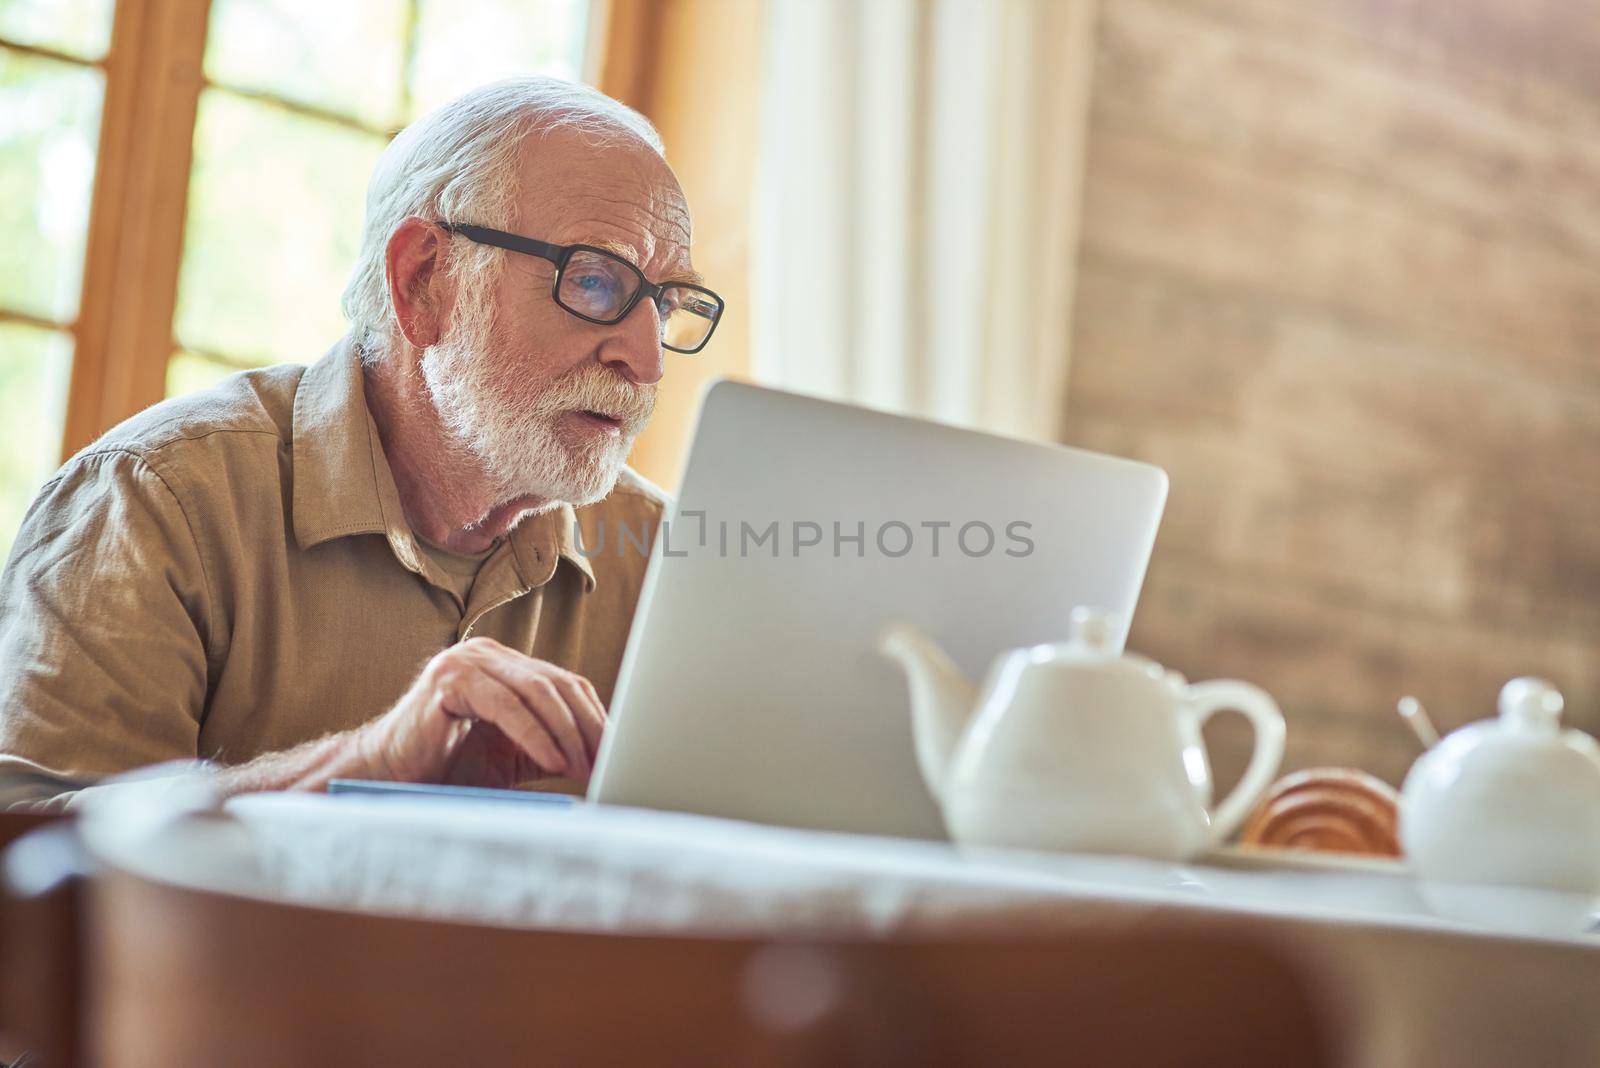 Male retiree in glasses carefully looking at laptop screen while working at home. Lifestyle concept